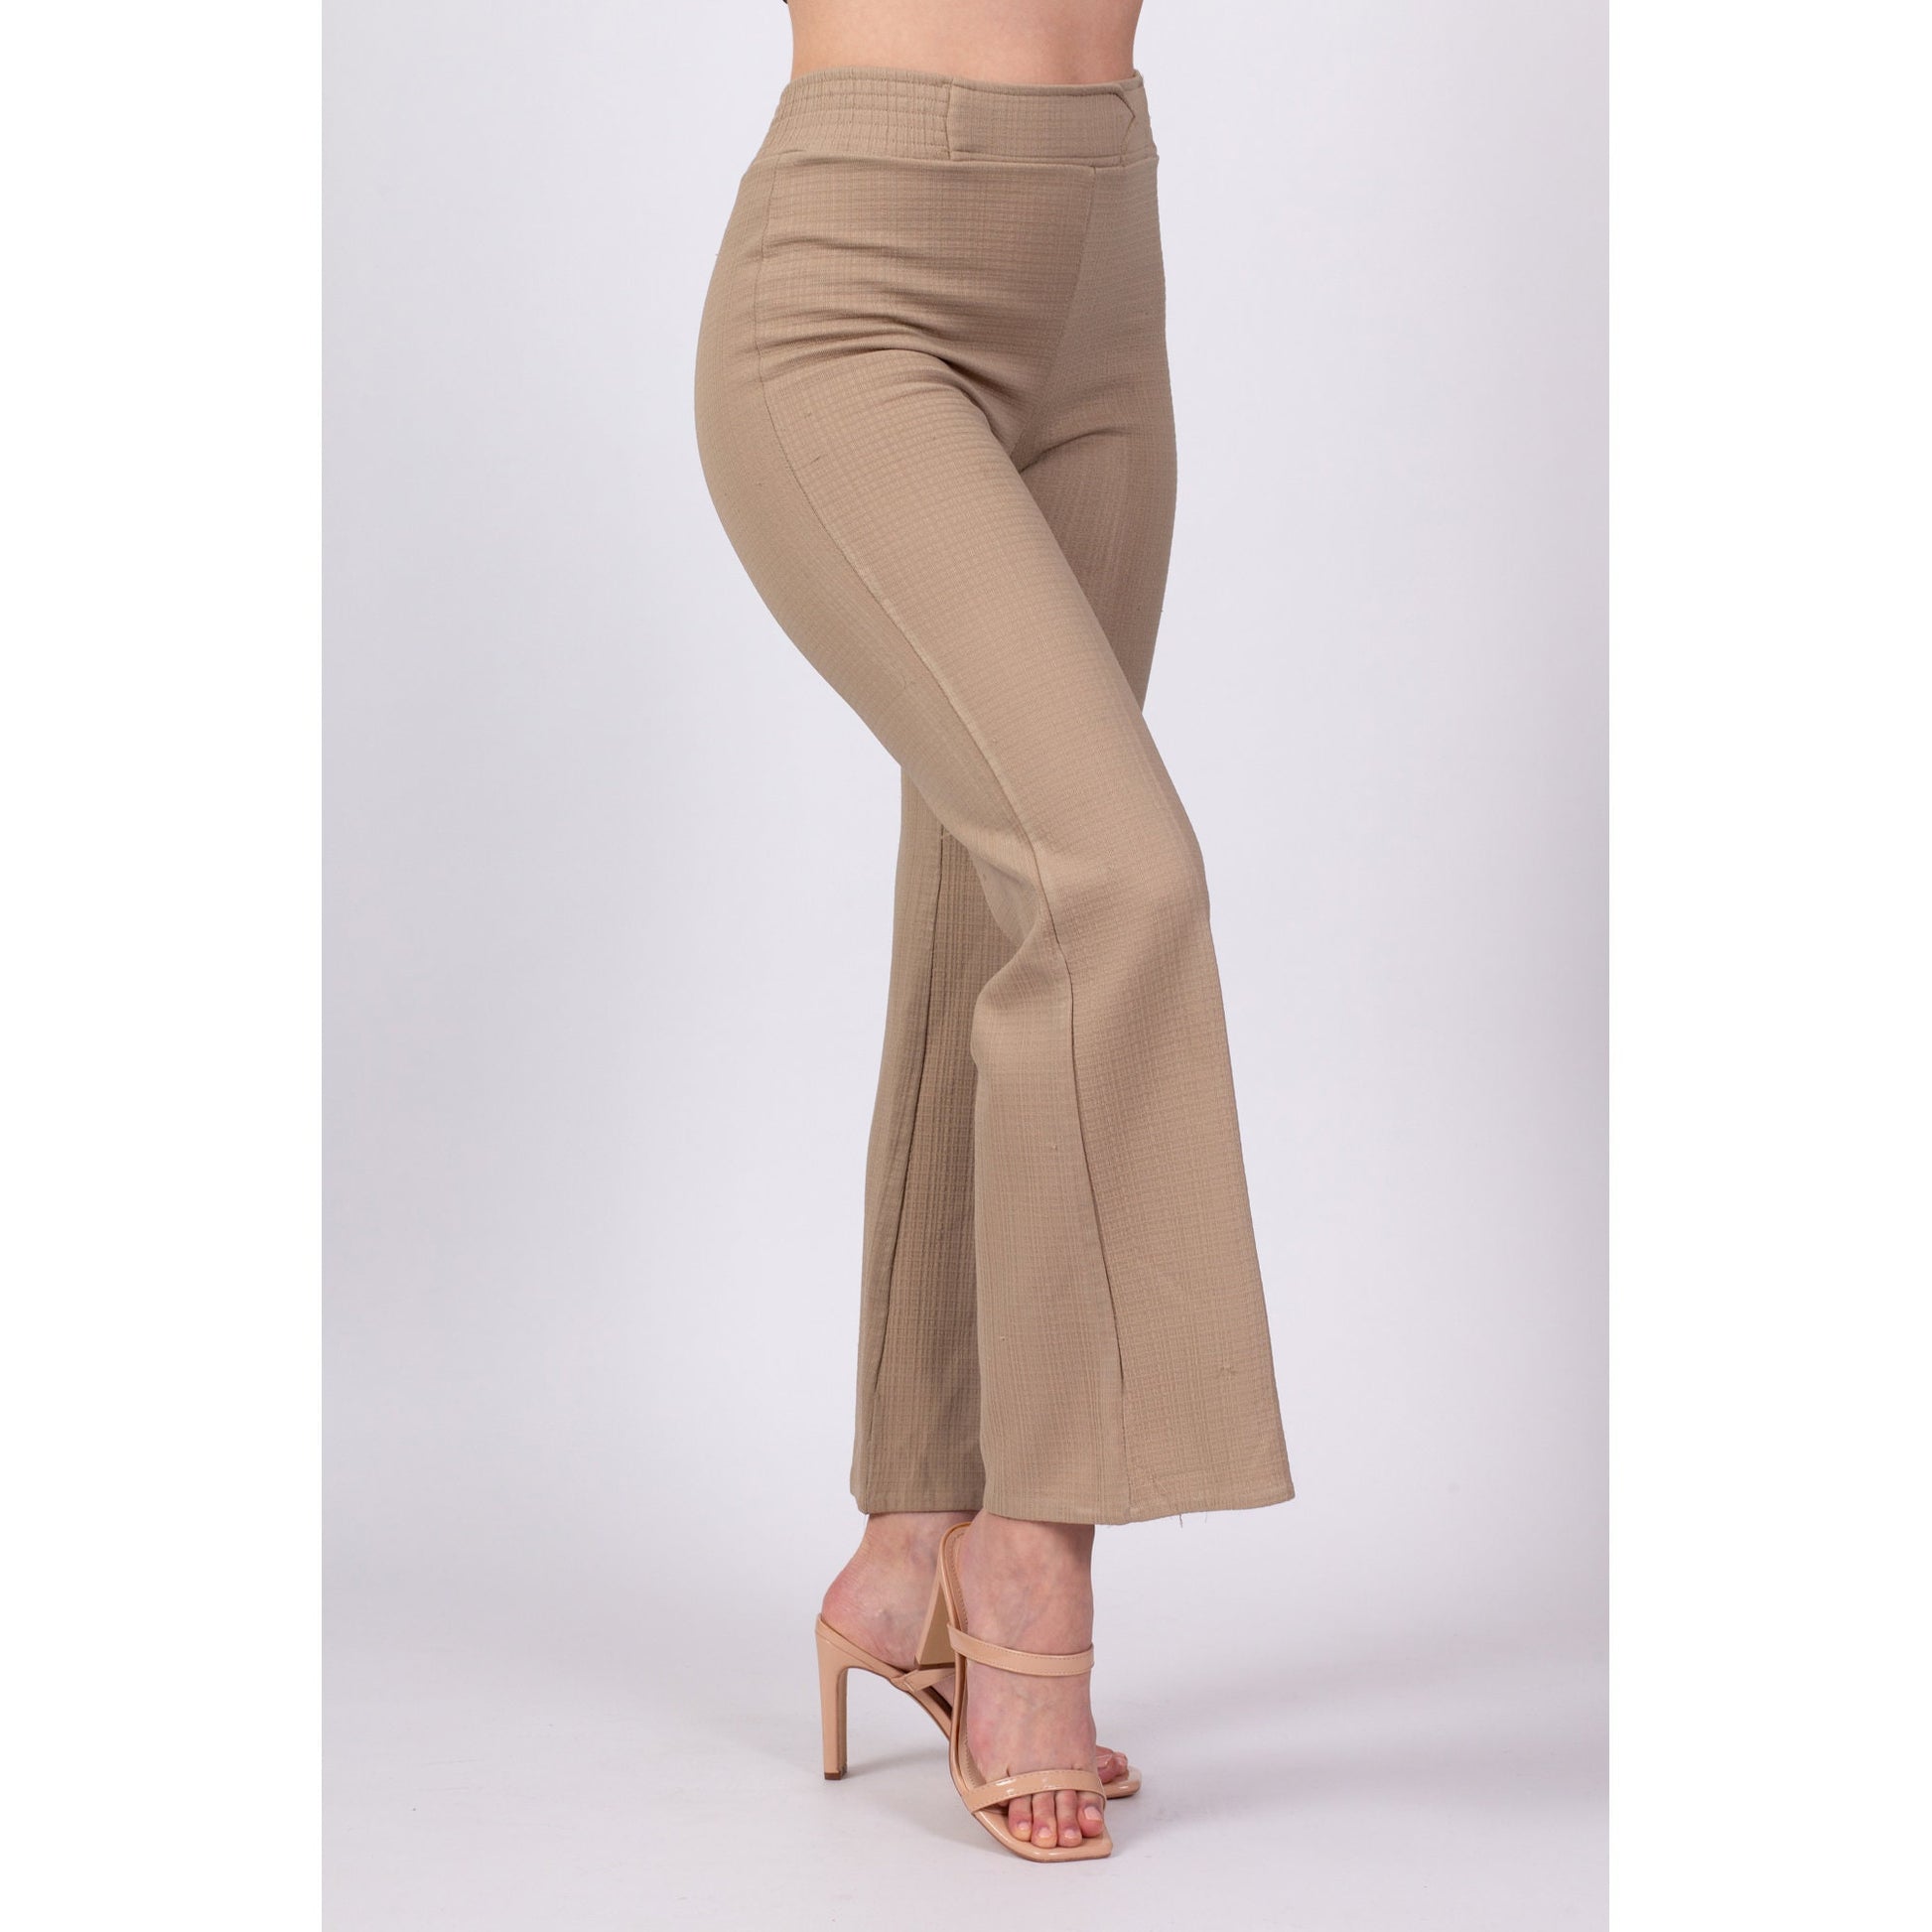 70s Taupe High Waisted Flared Pants - XS to Petite Small, 25"-27" 